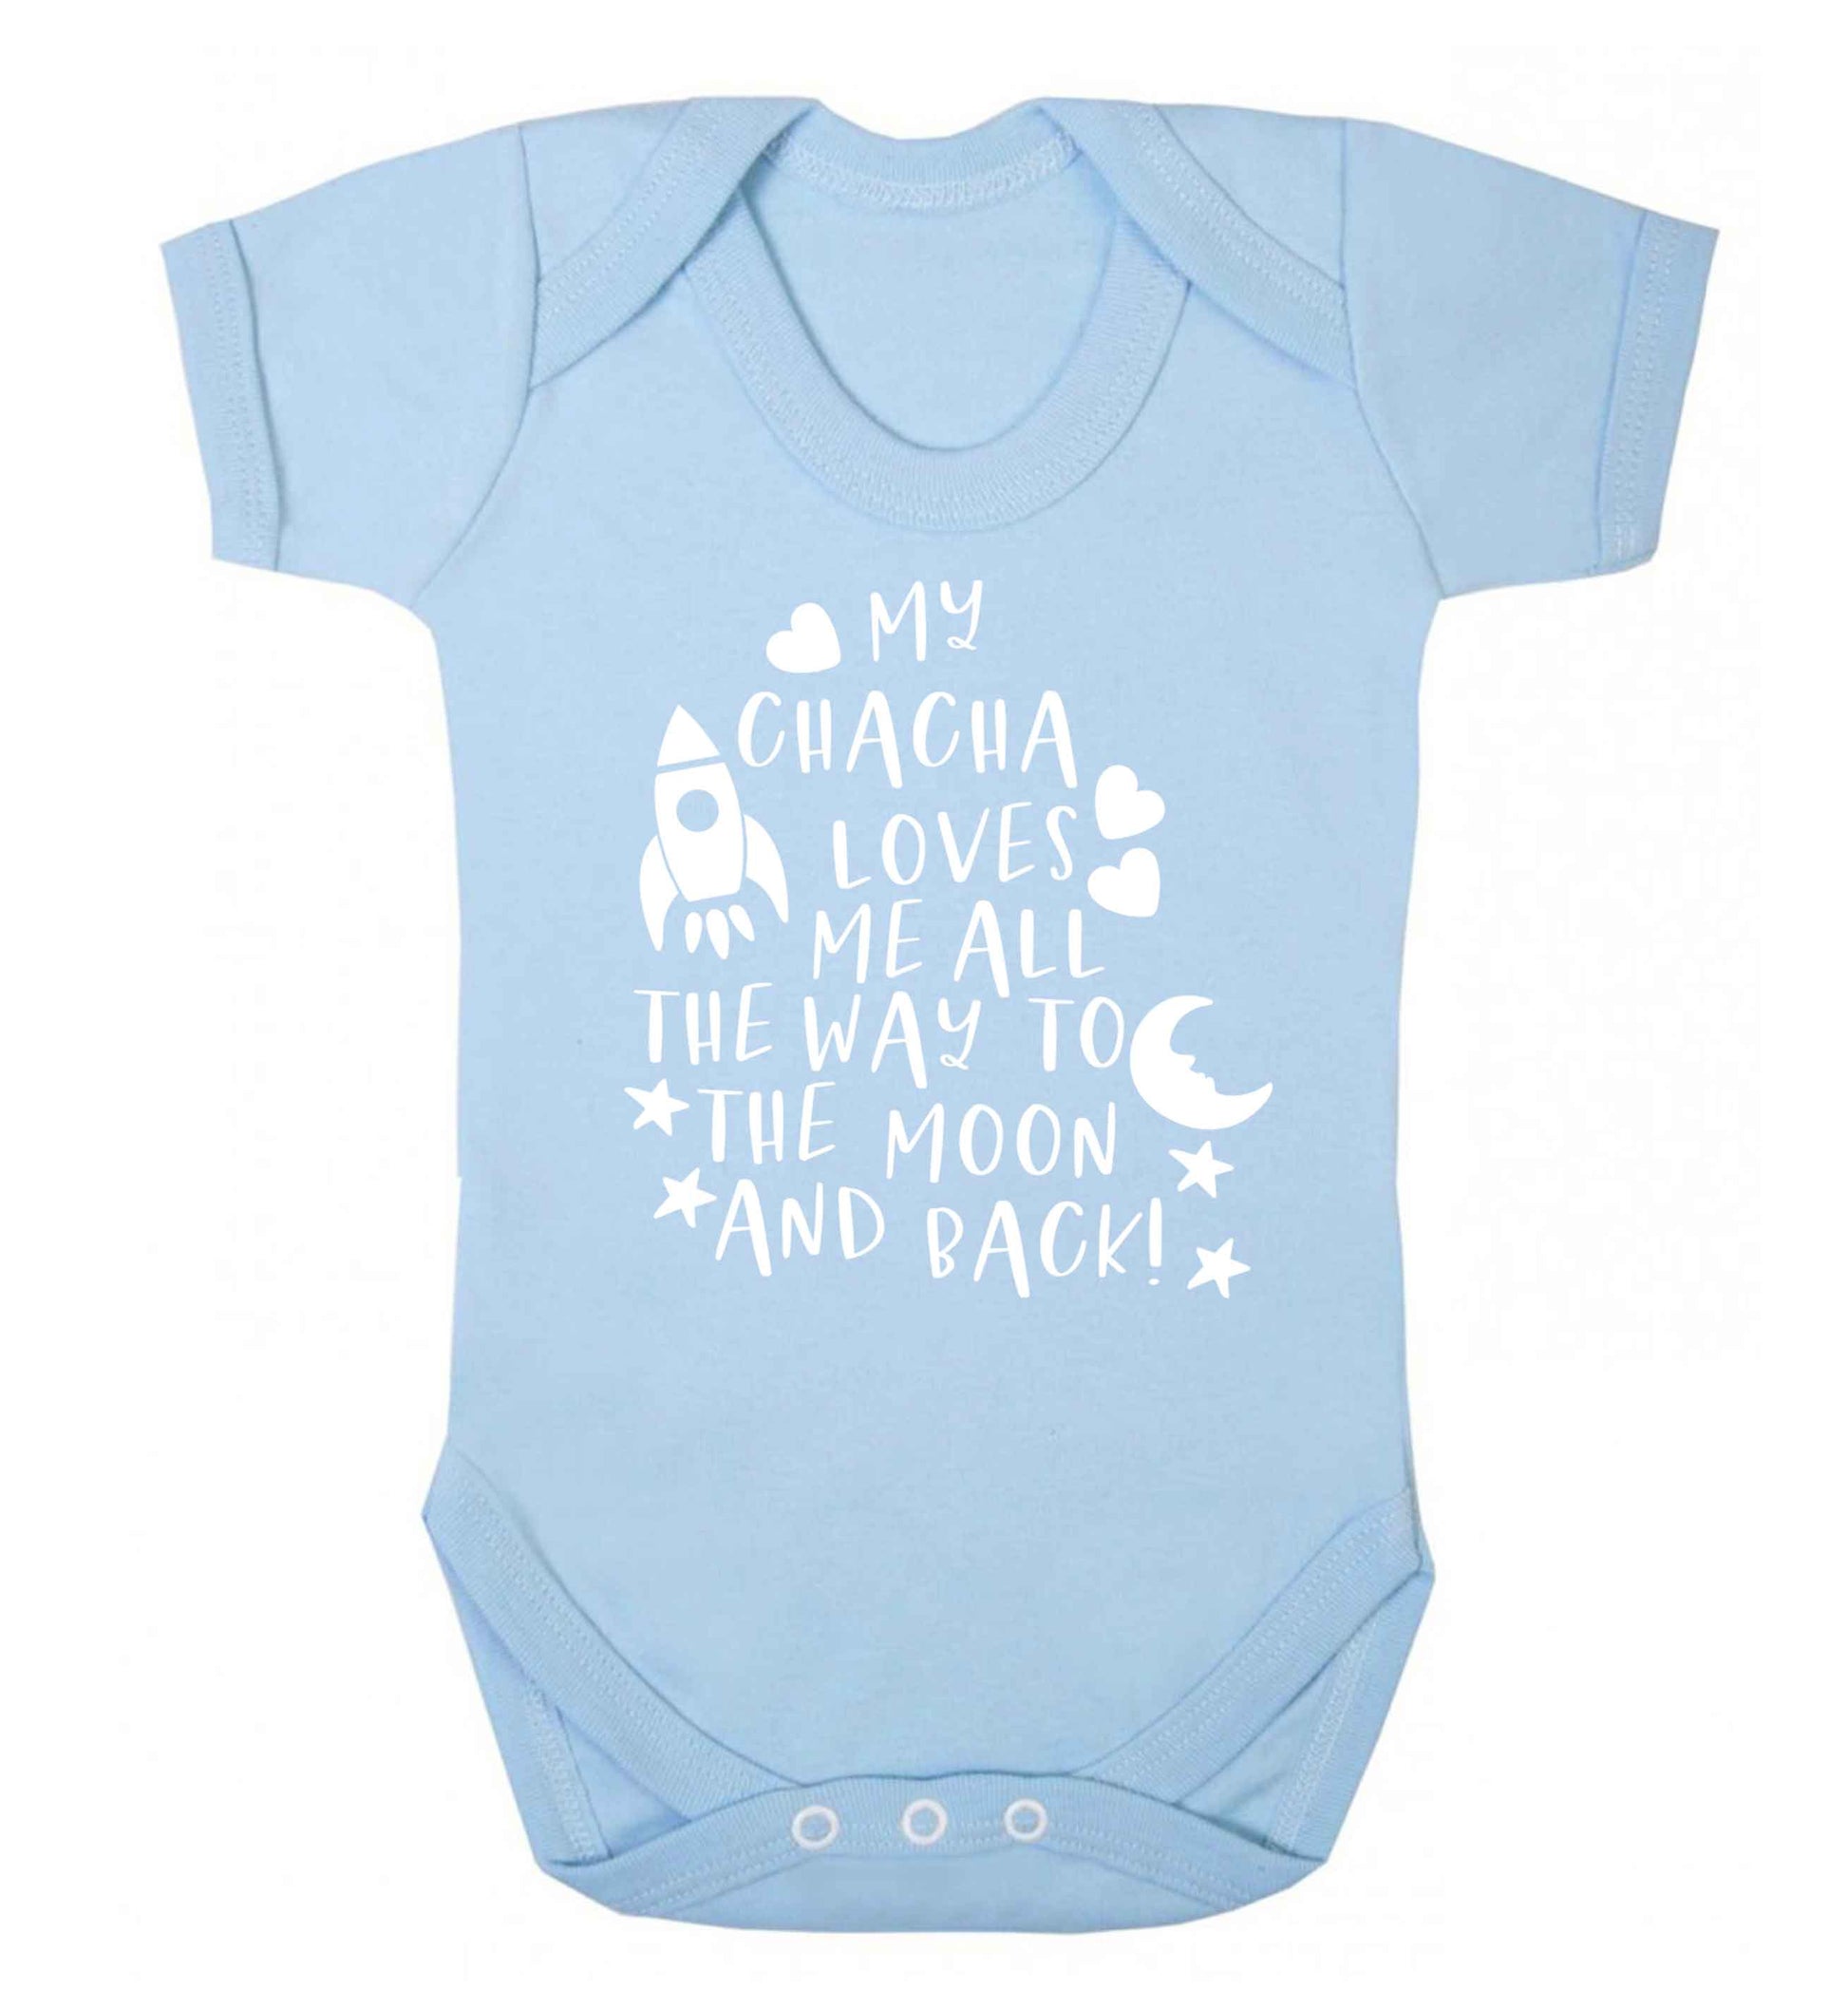 My chacha loves me all the way to the moon and back Baby Vest pale blue 18-24 months